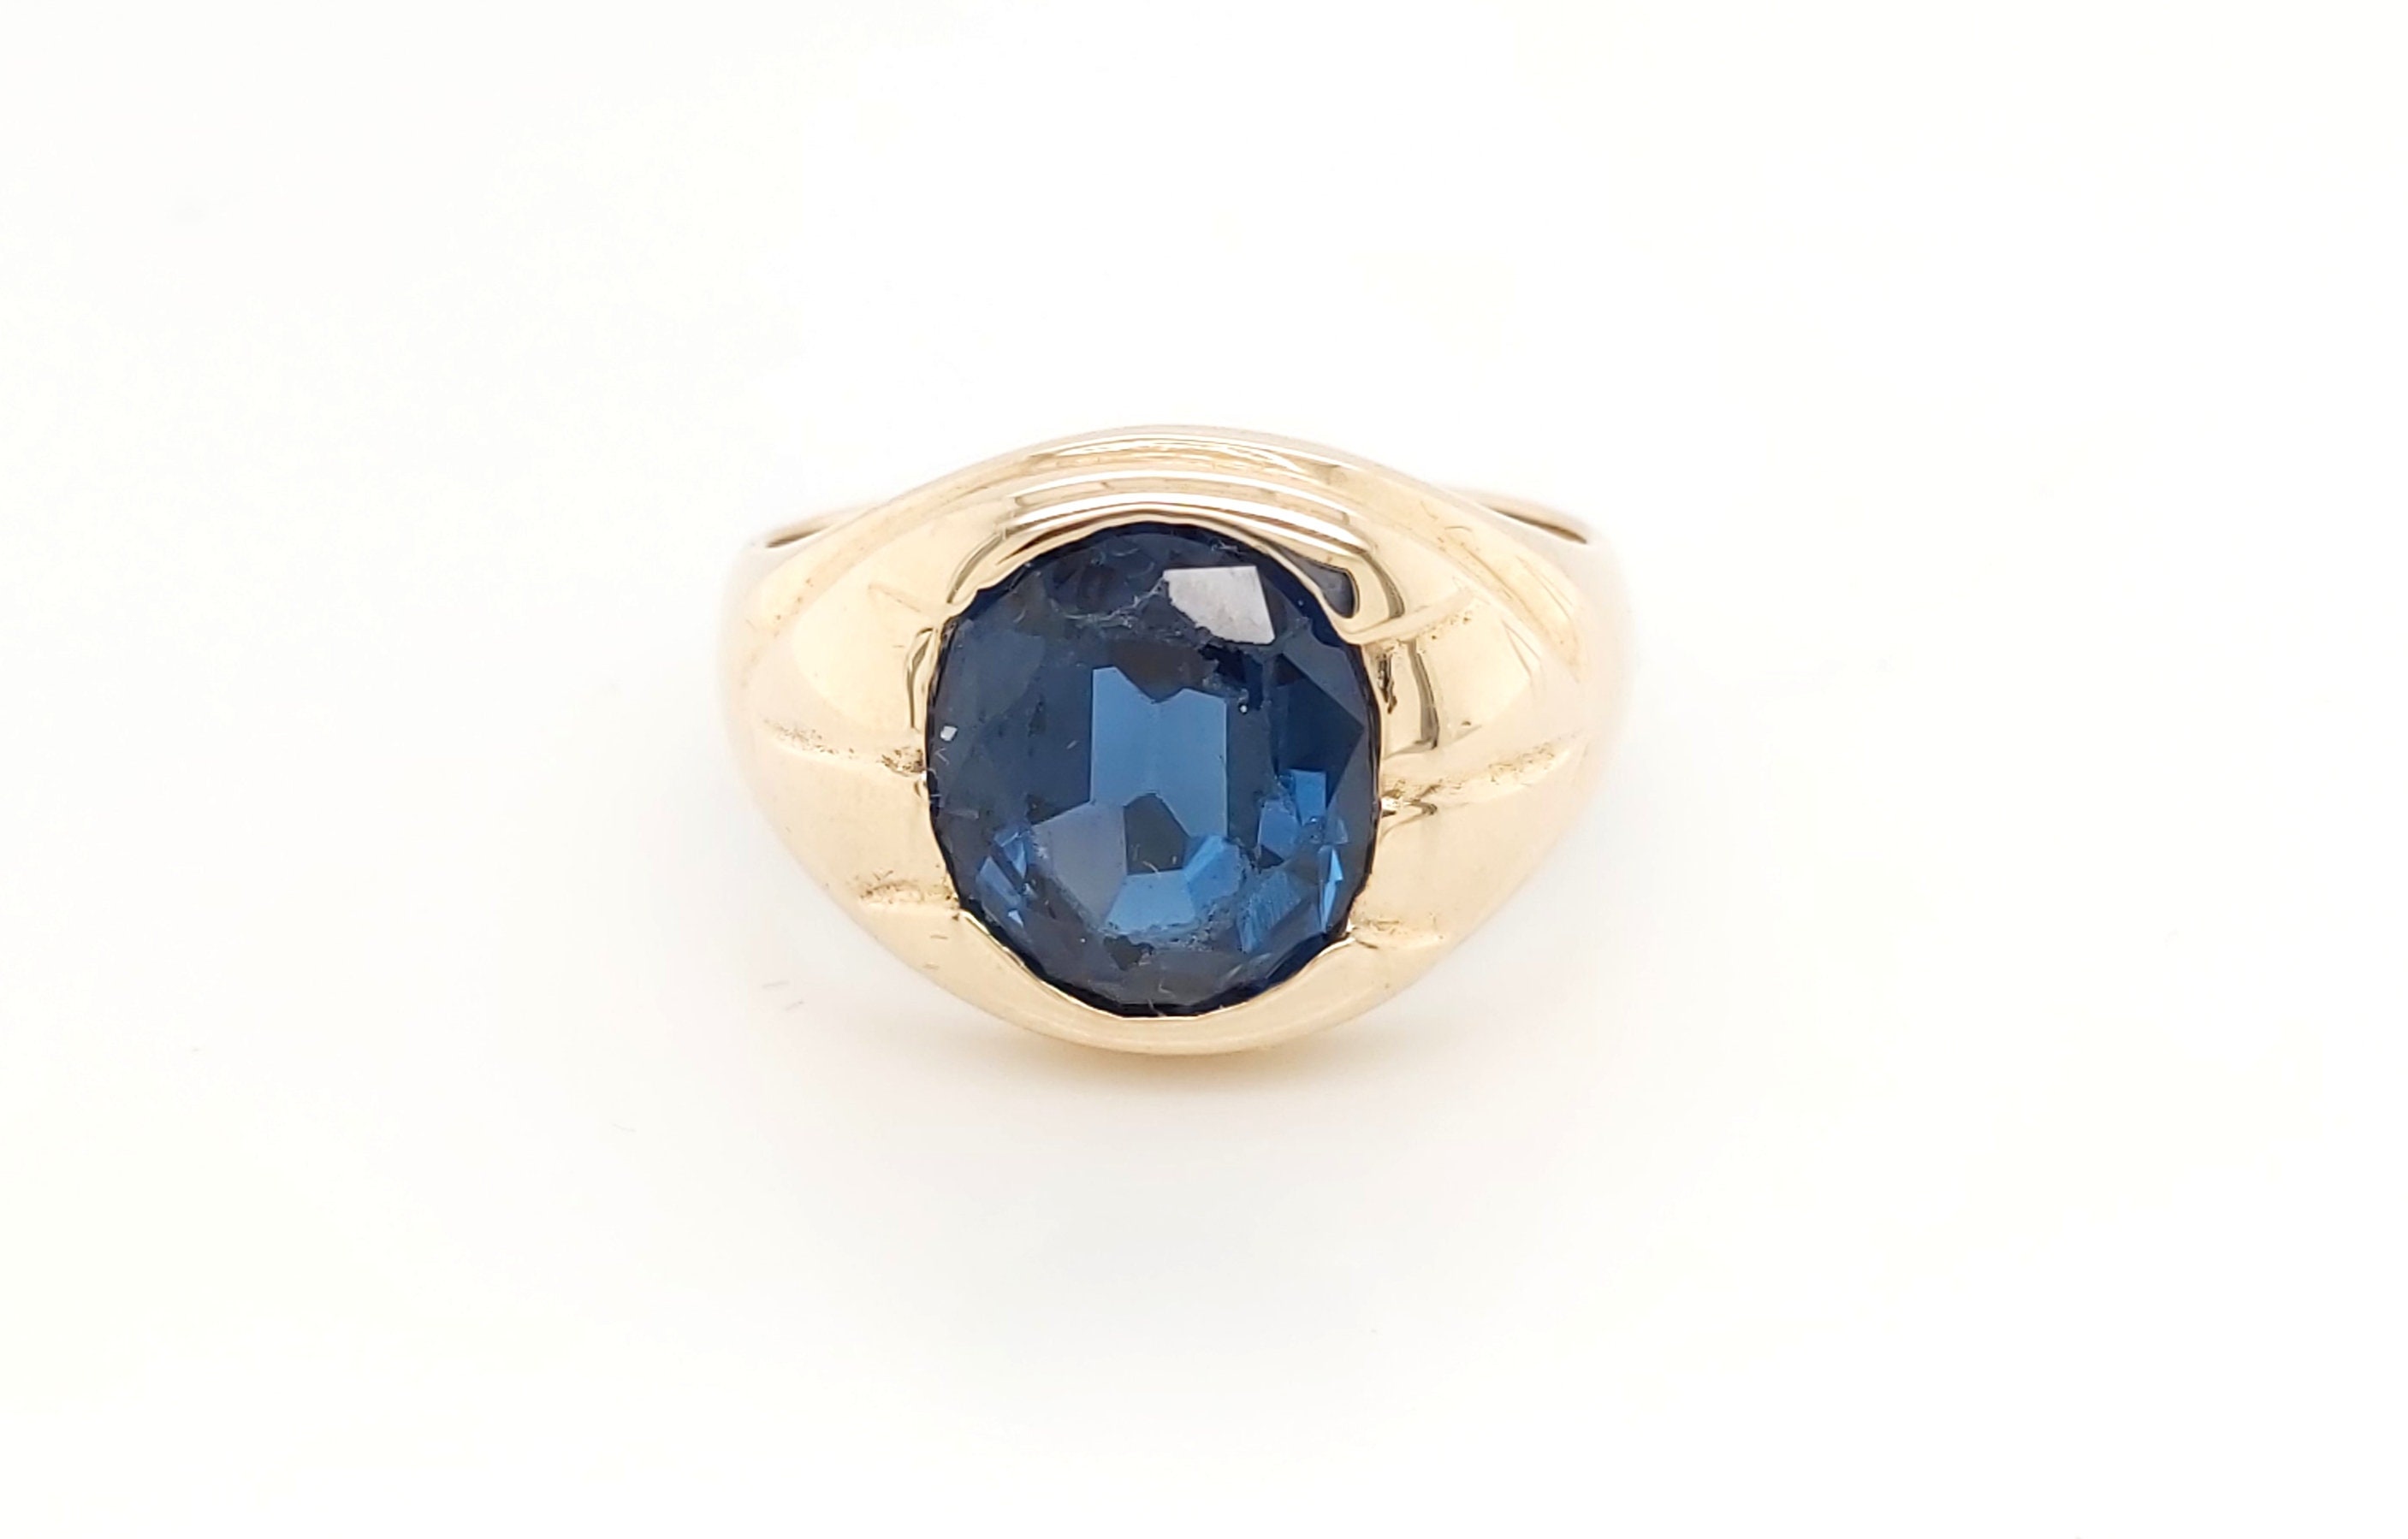 10k Yellow Gold Men's Ring With A Blue Stone - Etsy